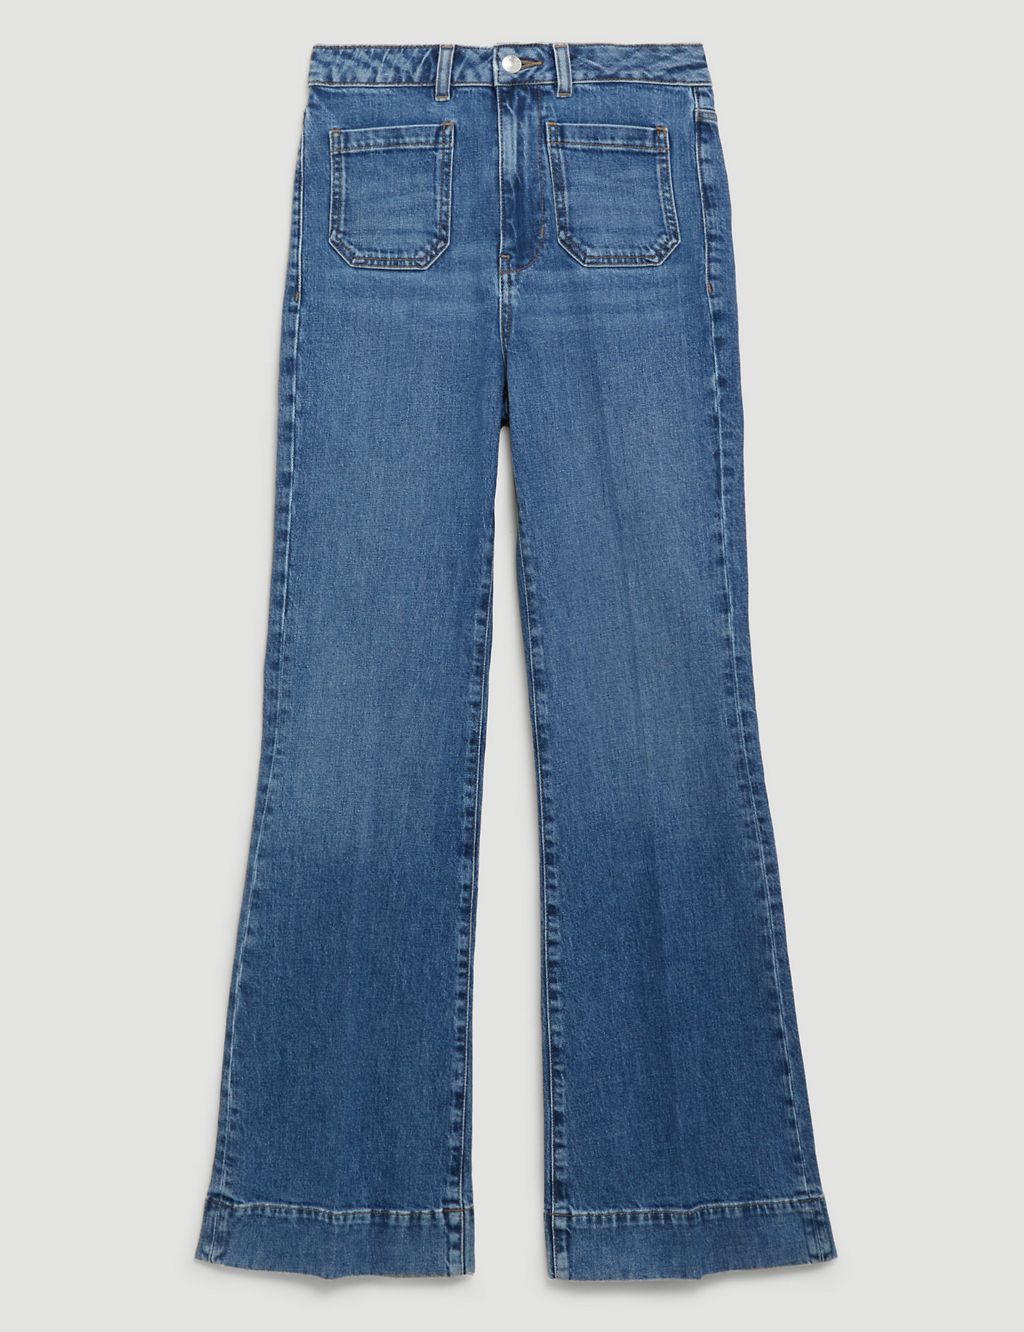 Patch Pocket Flare High Waisted Jeans 1 of 5